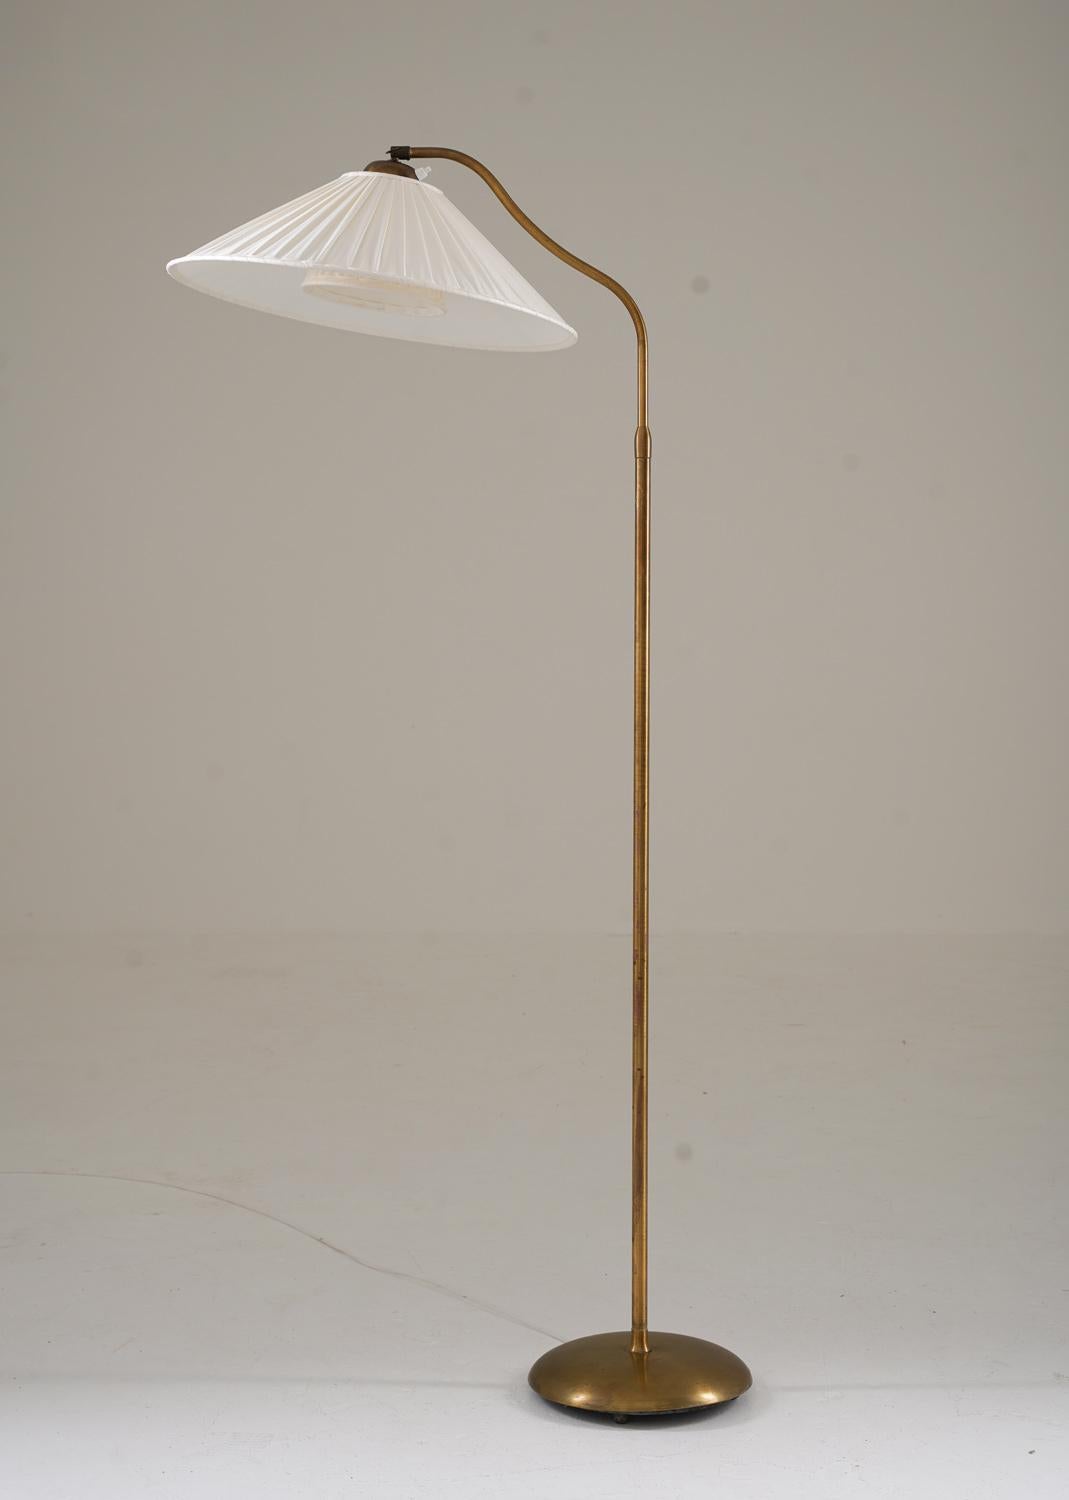 This is a lovely Swedish Modern floor lamp that was manufactured in Sweden during the 1940s.
The lamp features a brass-coated iron base and a brass rod, which supports a swivel arm that holds the shade. The swivel arm is adjustable in height,